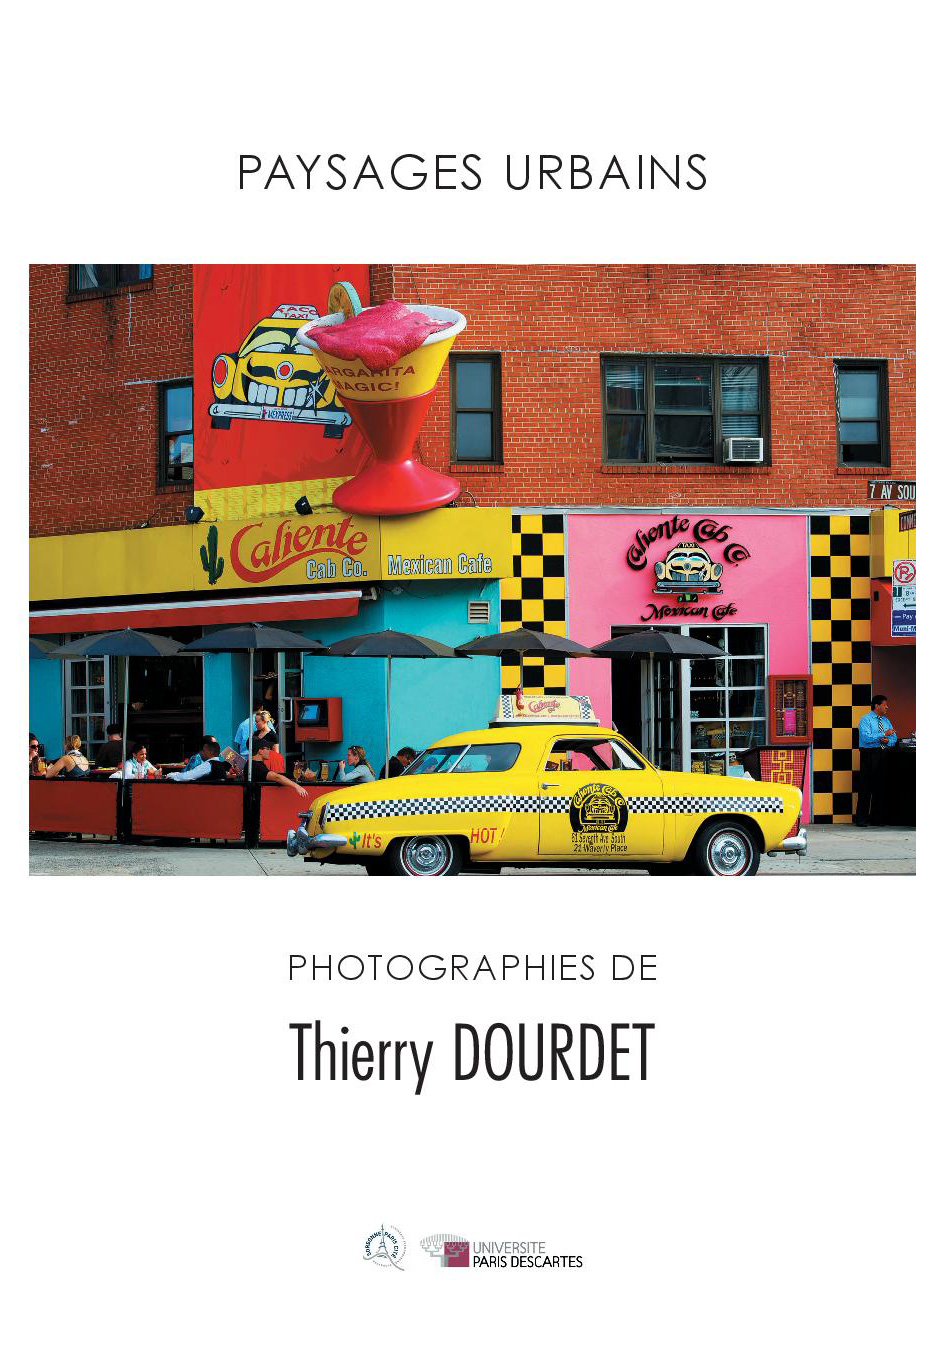 https://www.thierry-dourdet.com/wp-content/uploads/2021/04/BOOK-PHOTOS-Paysages-page-001.jpg